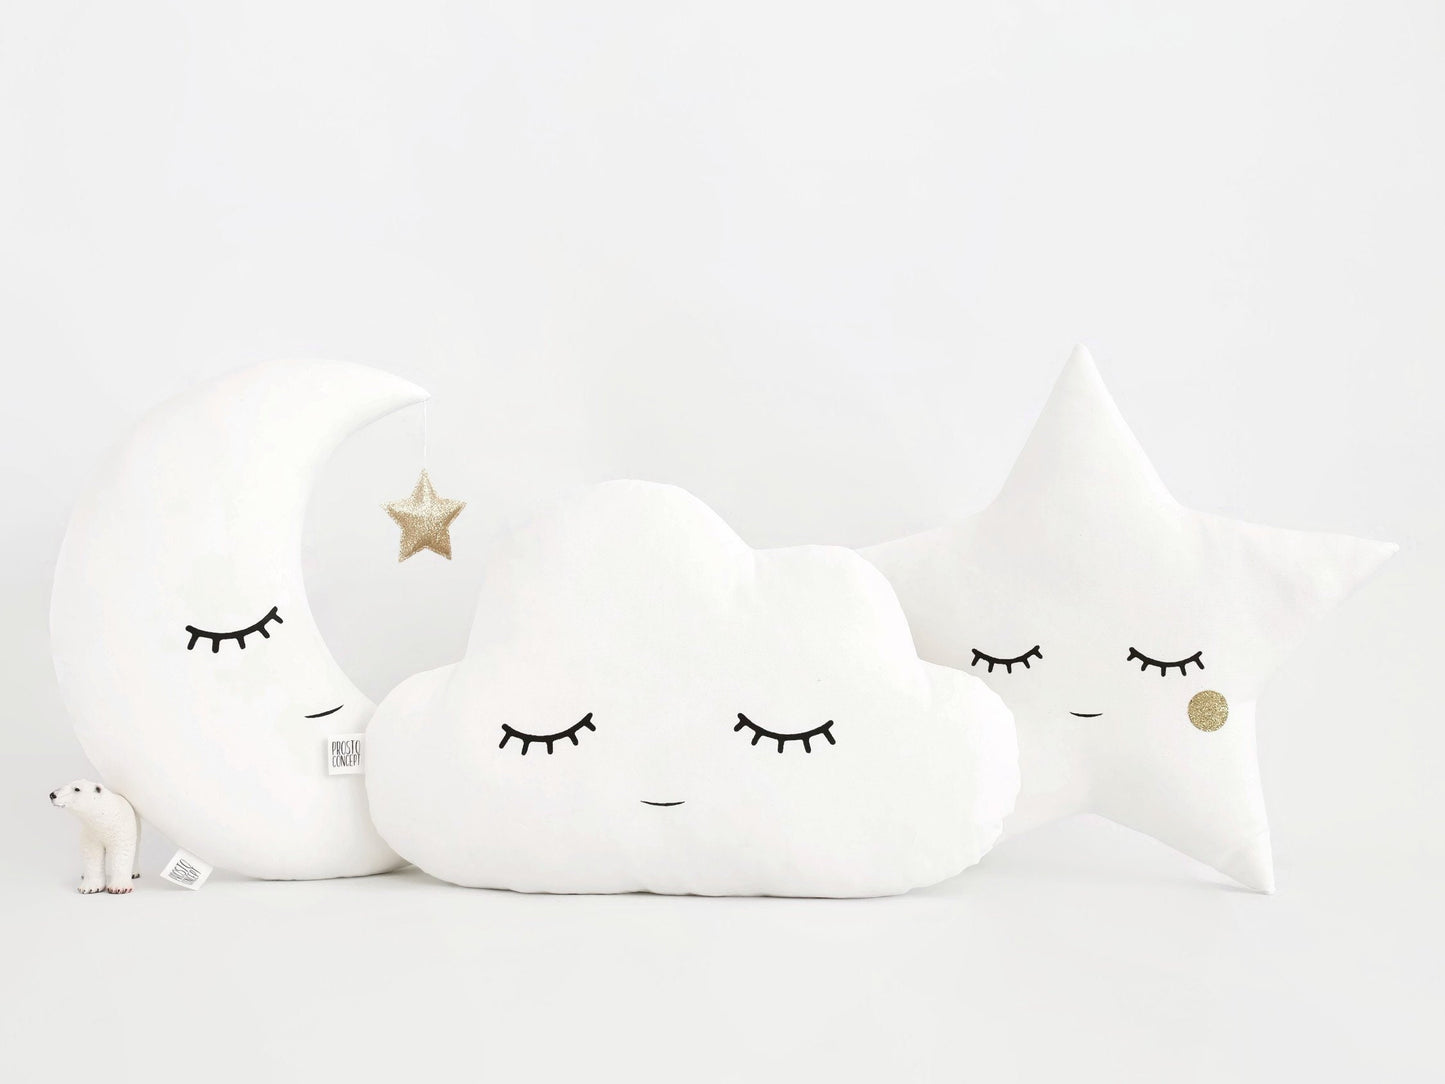 Set of 3 White Pillows - Cloud, Crescent Moon and Star Pillows with Golden Touch